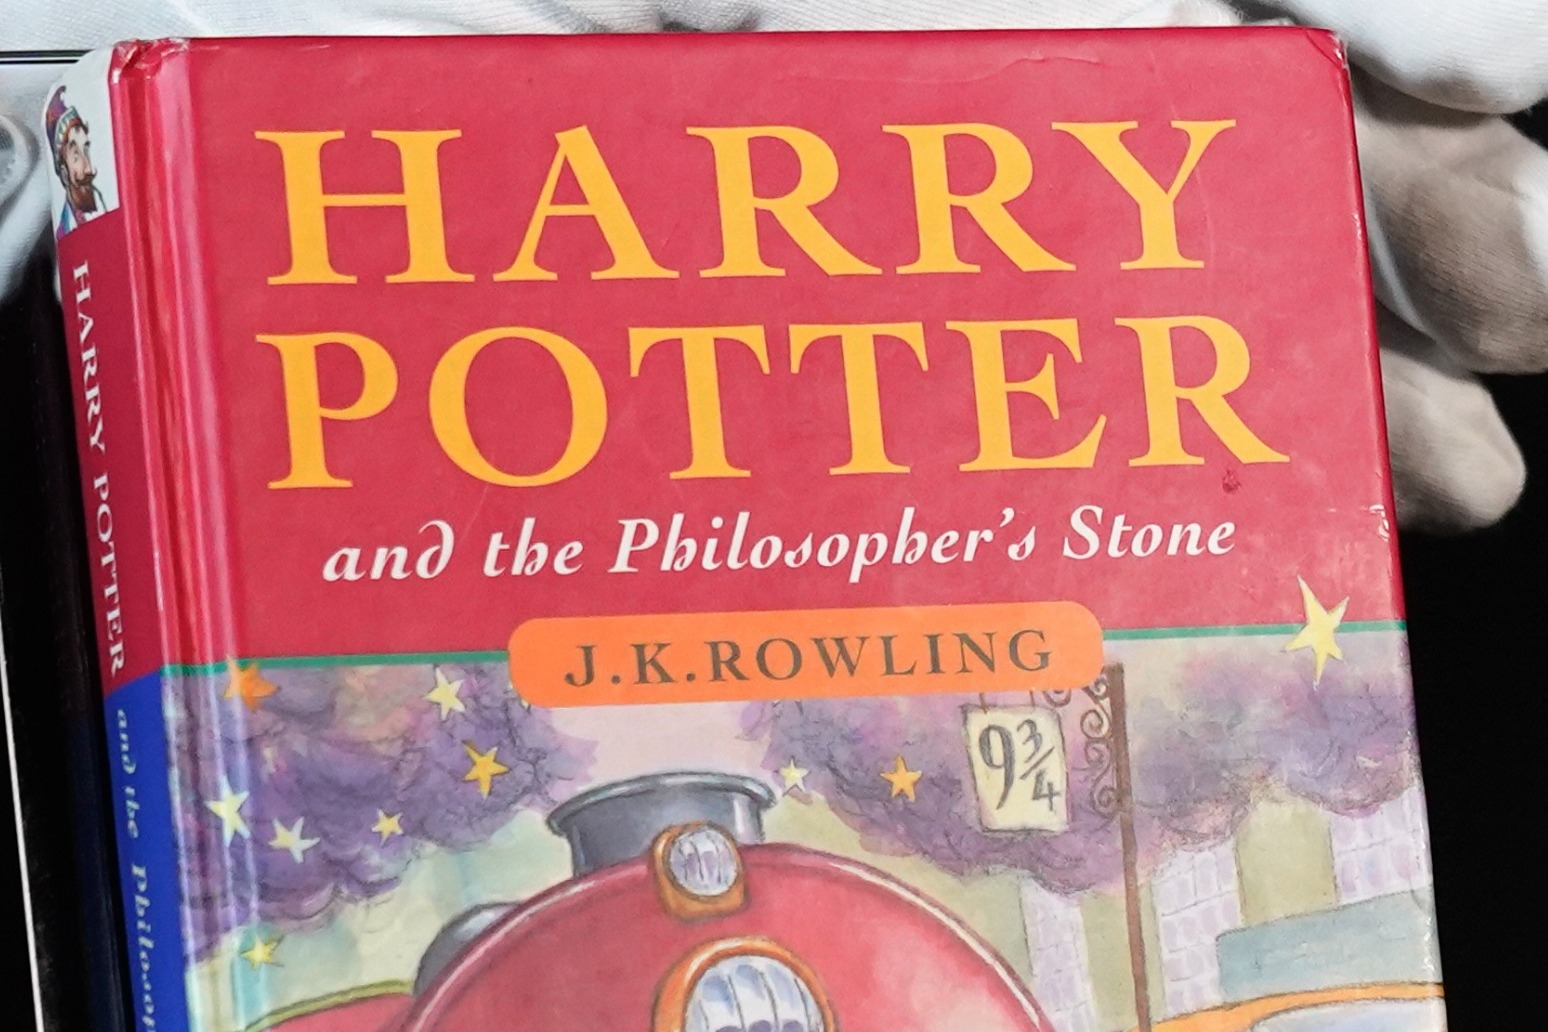 Rare edition of Harry Potter And The Philosopher’s Stone to go under hammer 